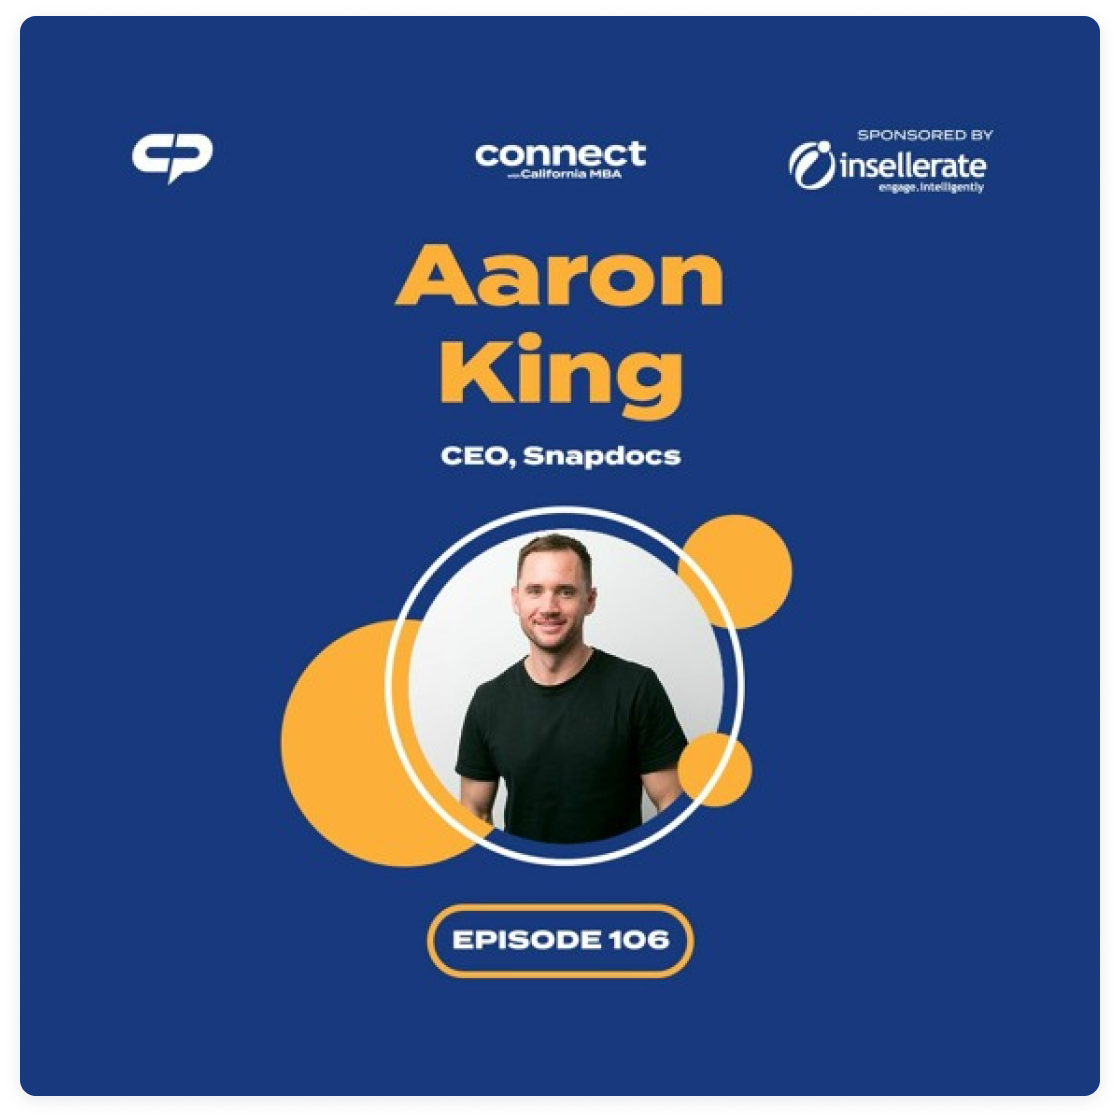 Video: CA MBA Podcast - Aaron King on Episode 106